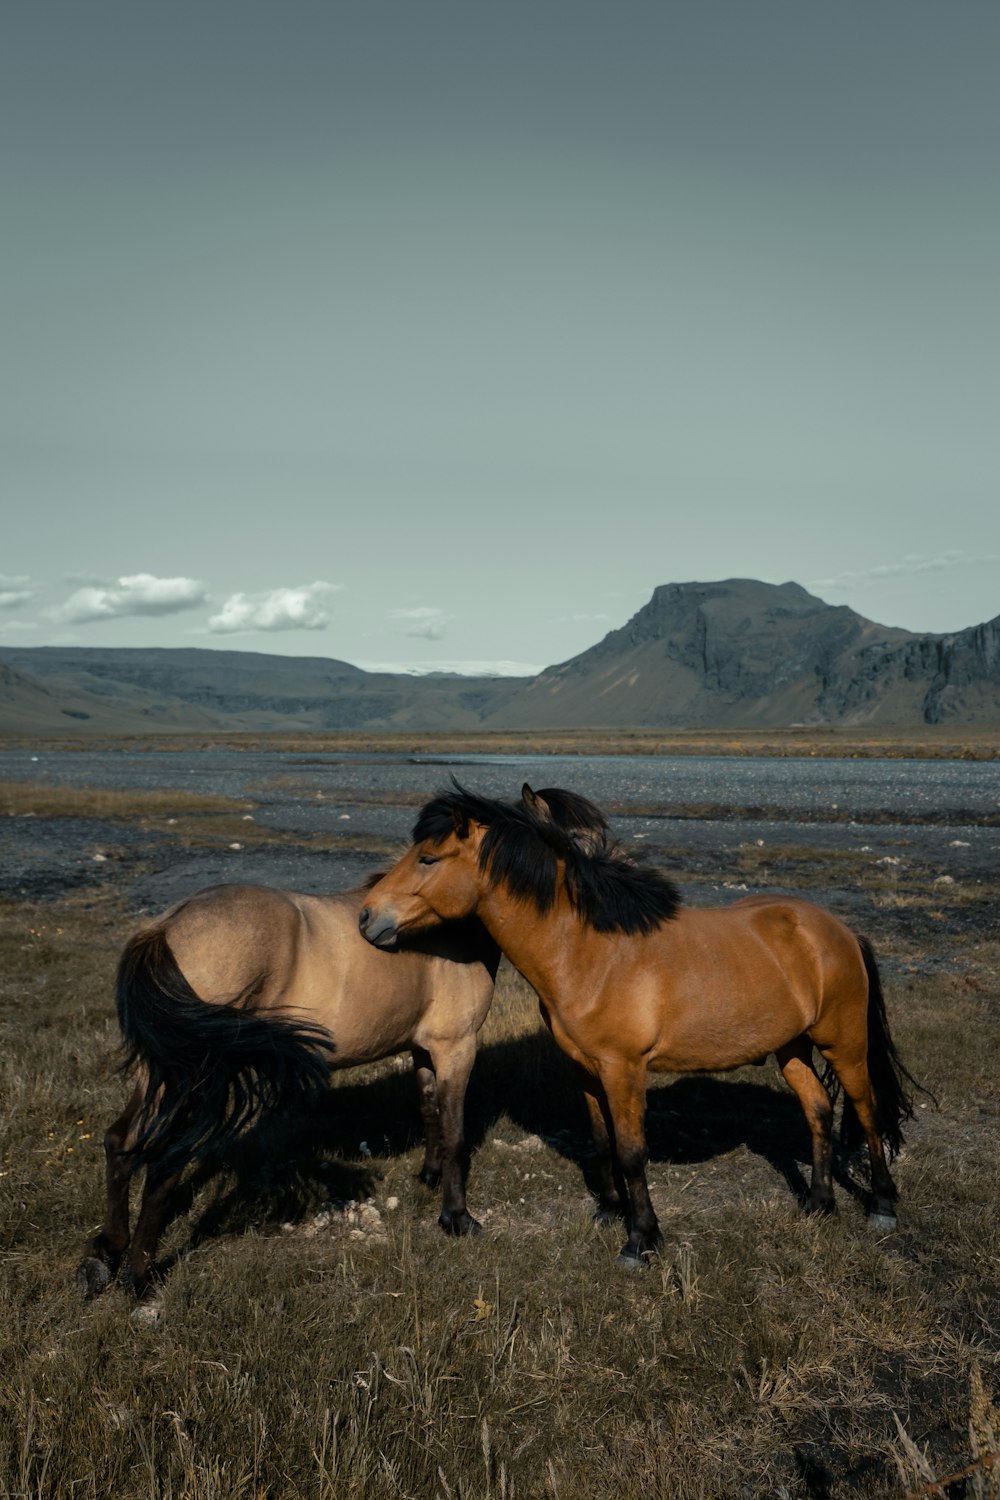 two brown horses on grass field